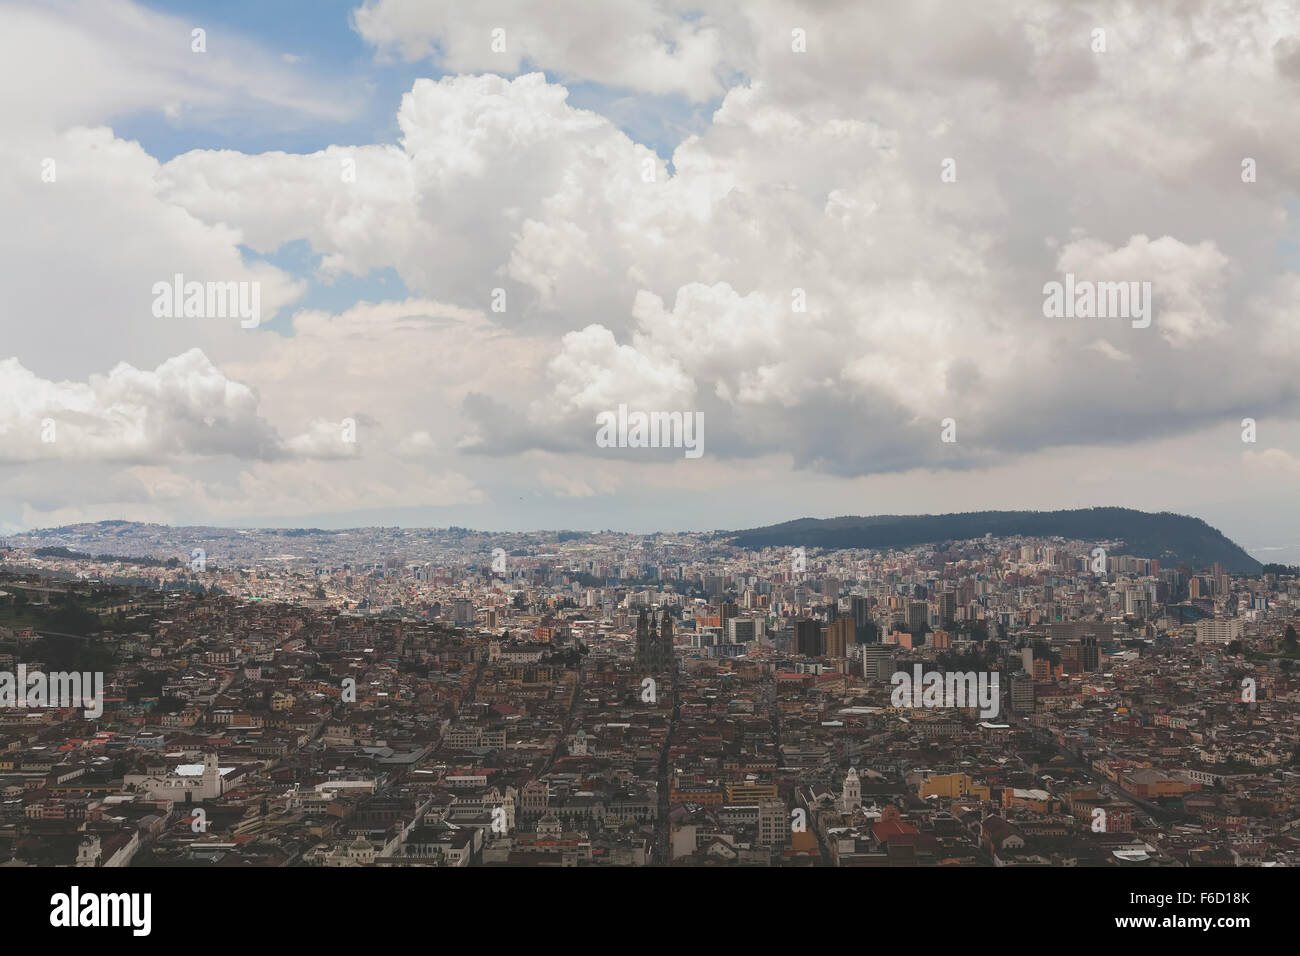 Top View Of The City Quito The Capital Of Ecuador, South America Stock Photo